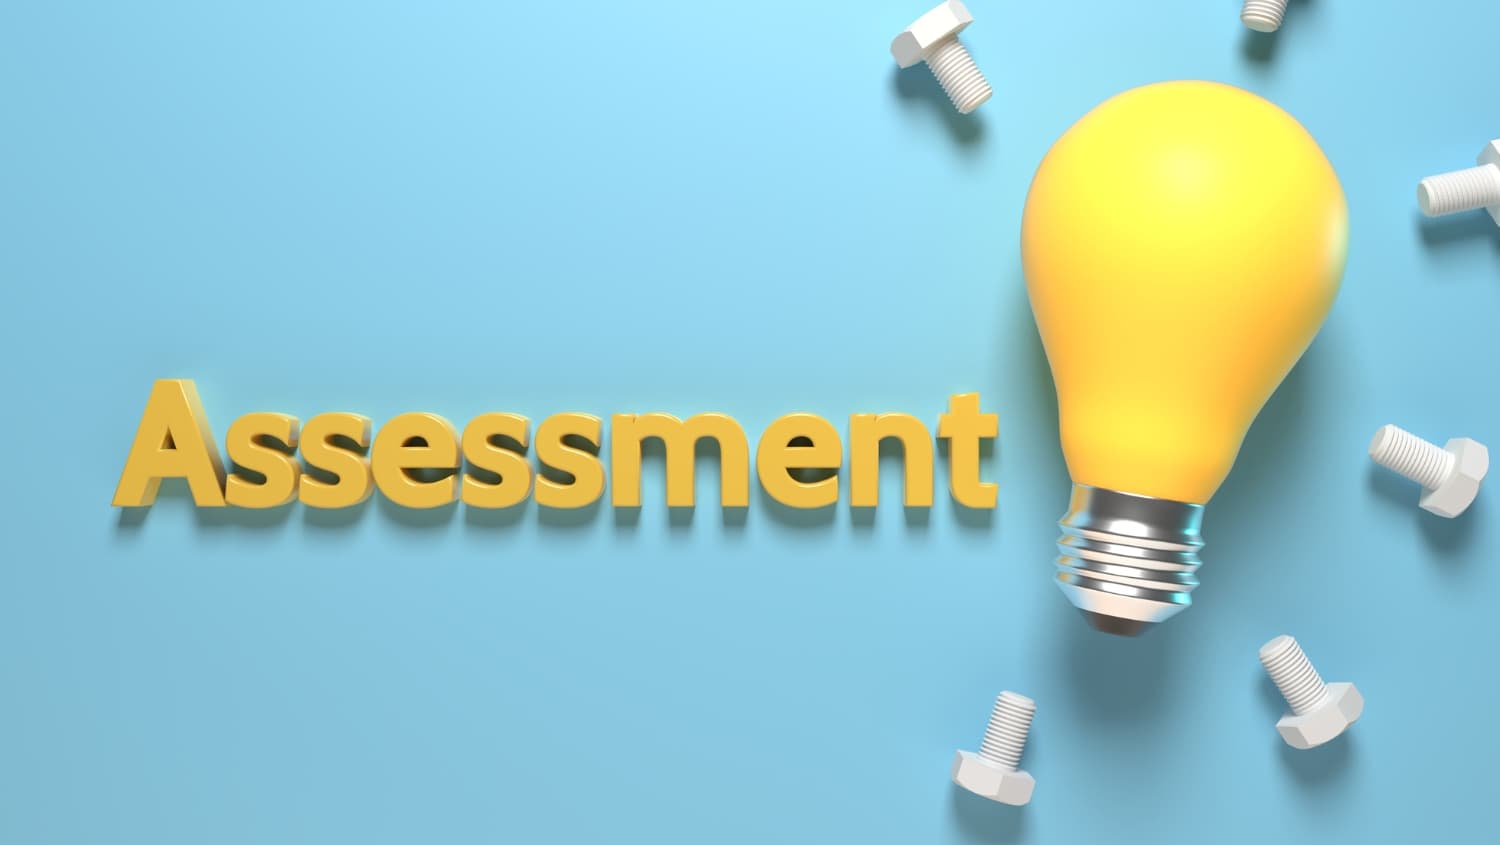 A website assessment is like a blood test